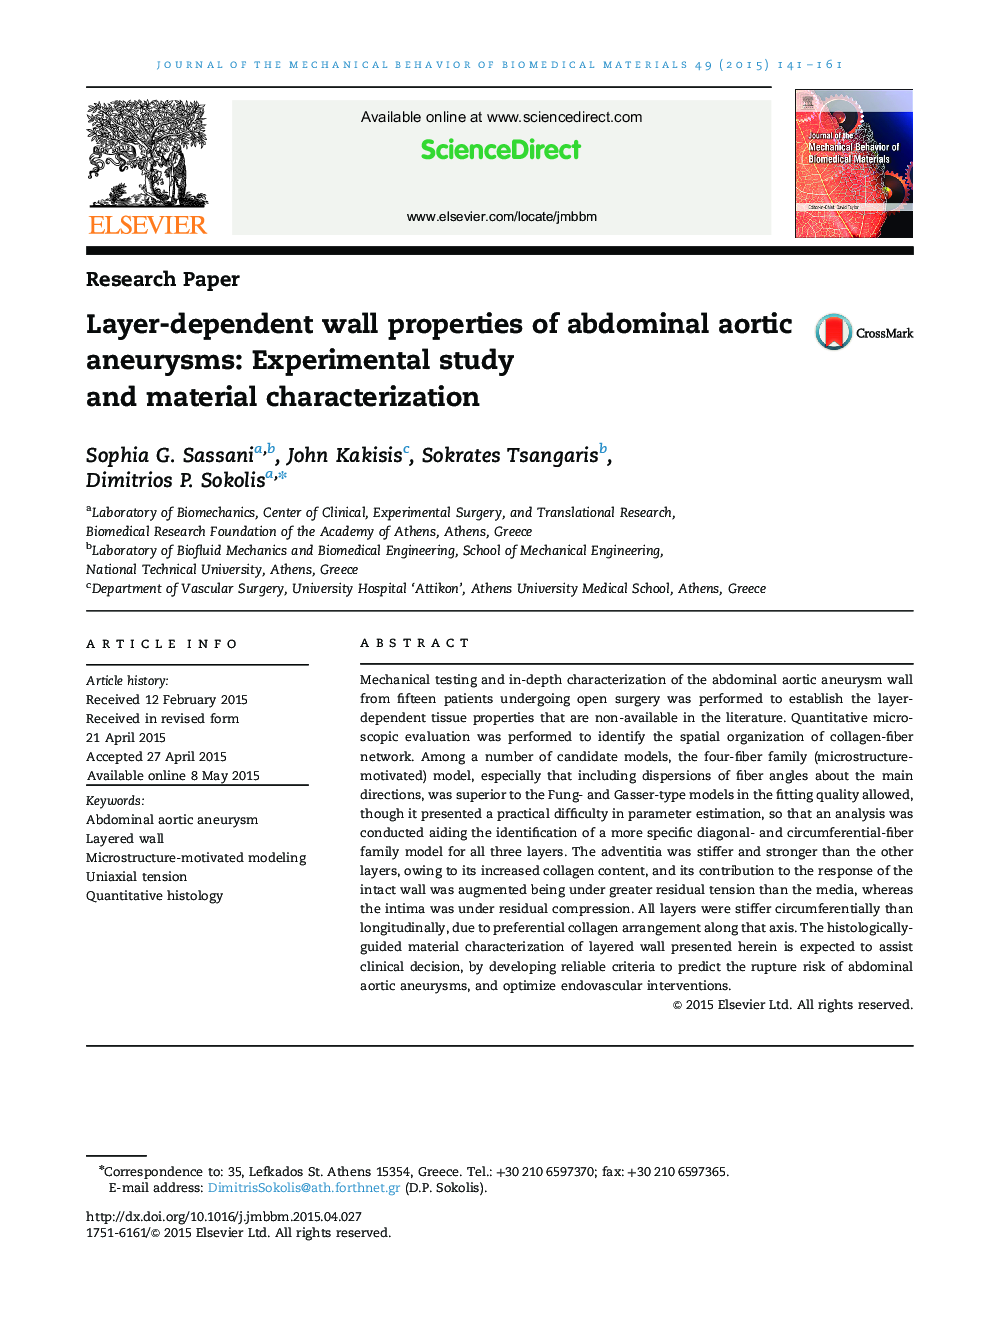 Layer-dependent wall properties of abdominal aortic aneurysms: Experimental study and material characterization